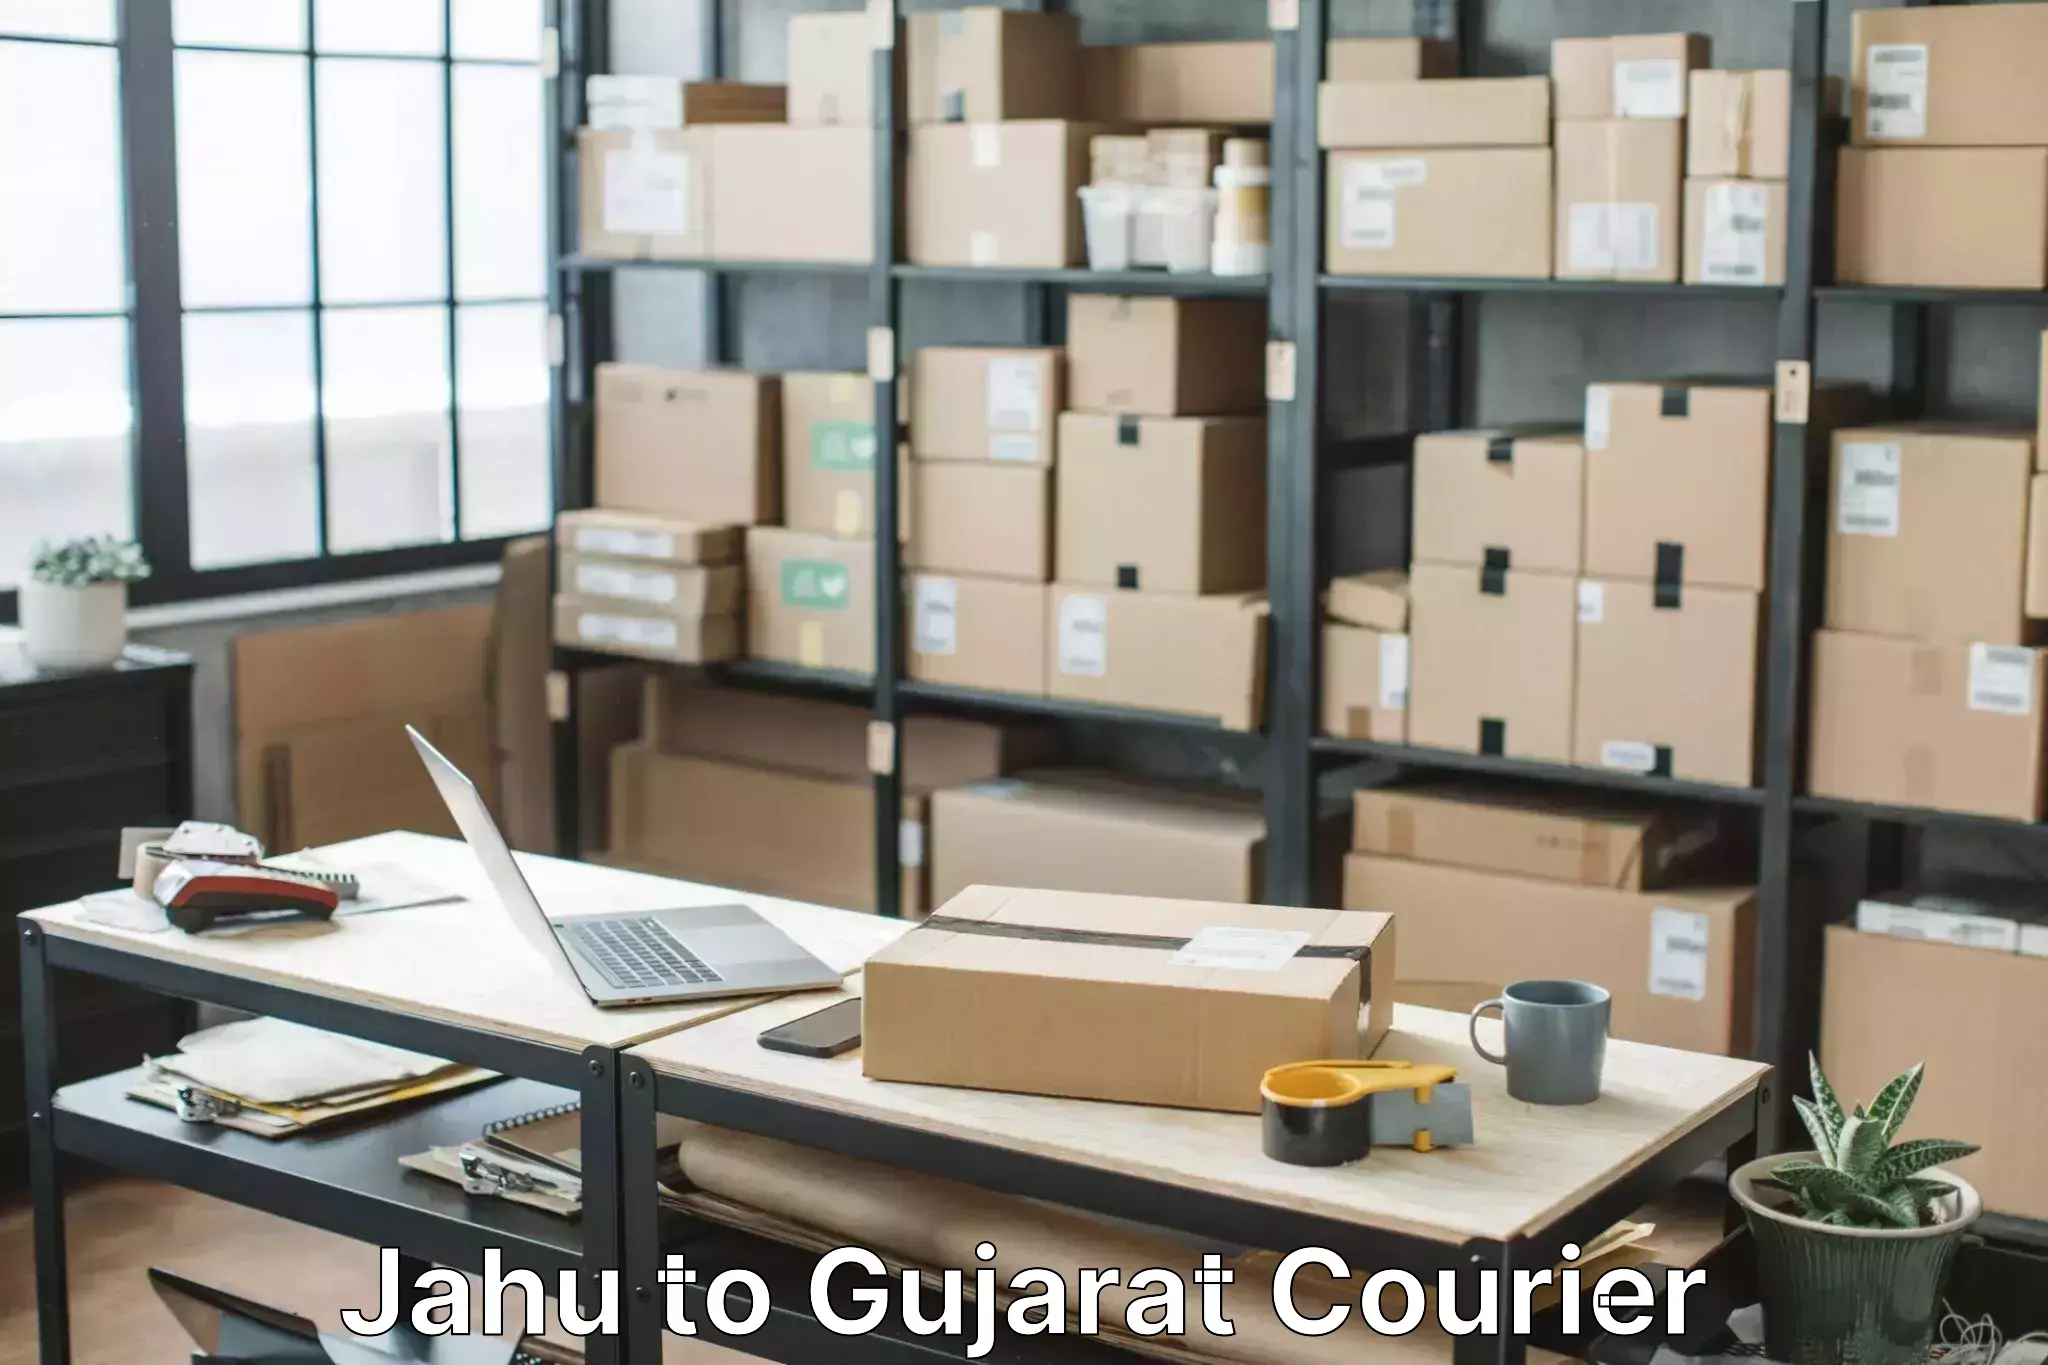 Hassle-free relocation Jahu to Morbi